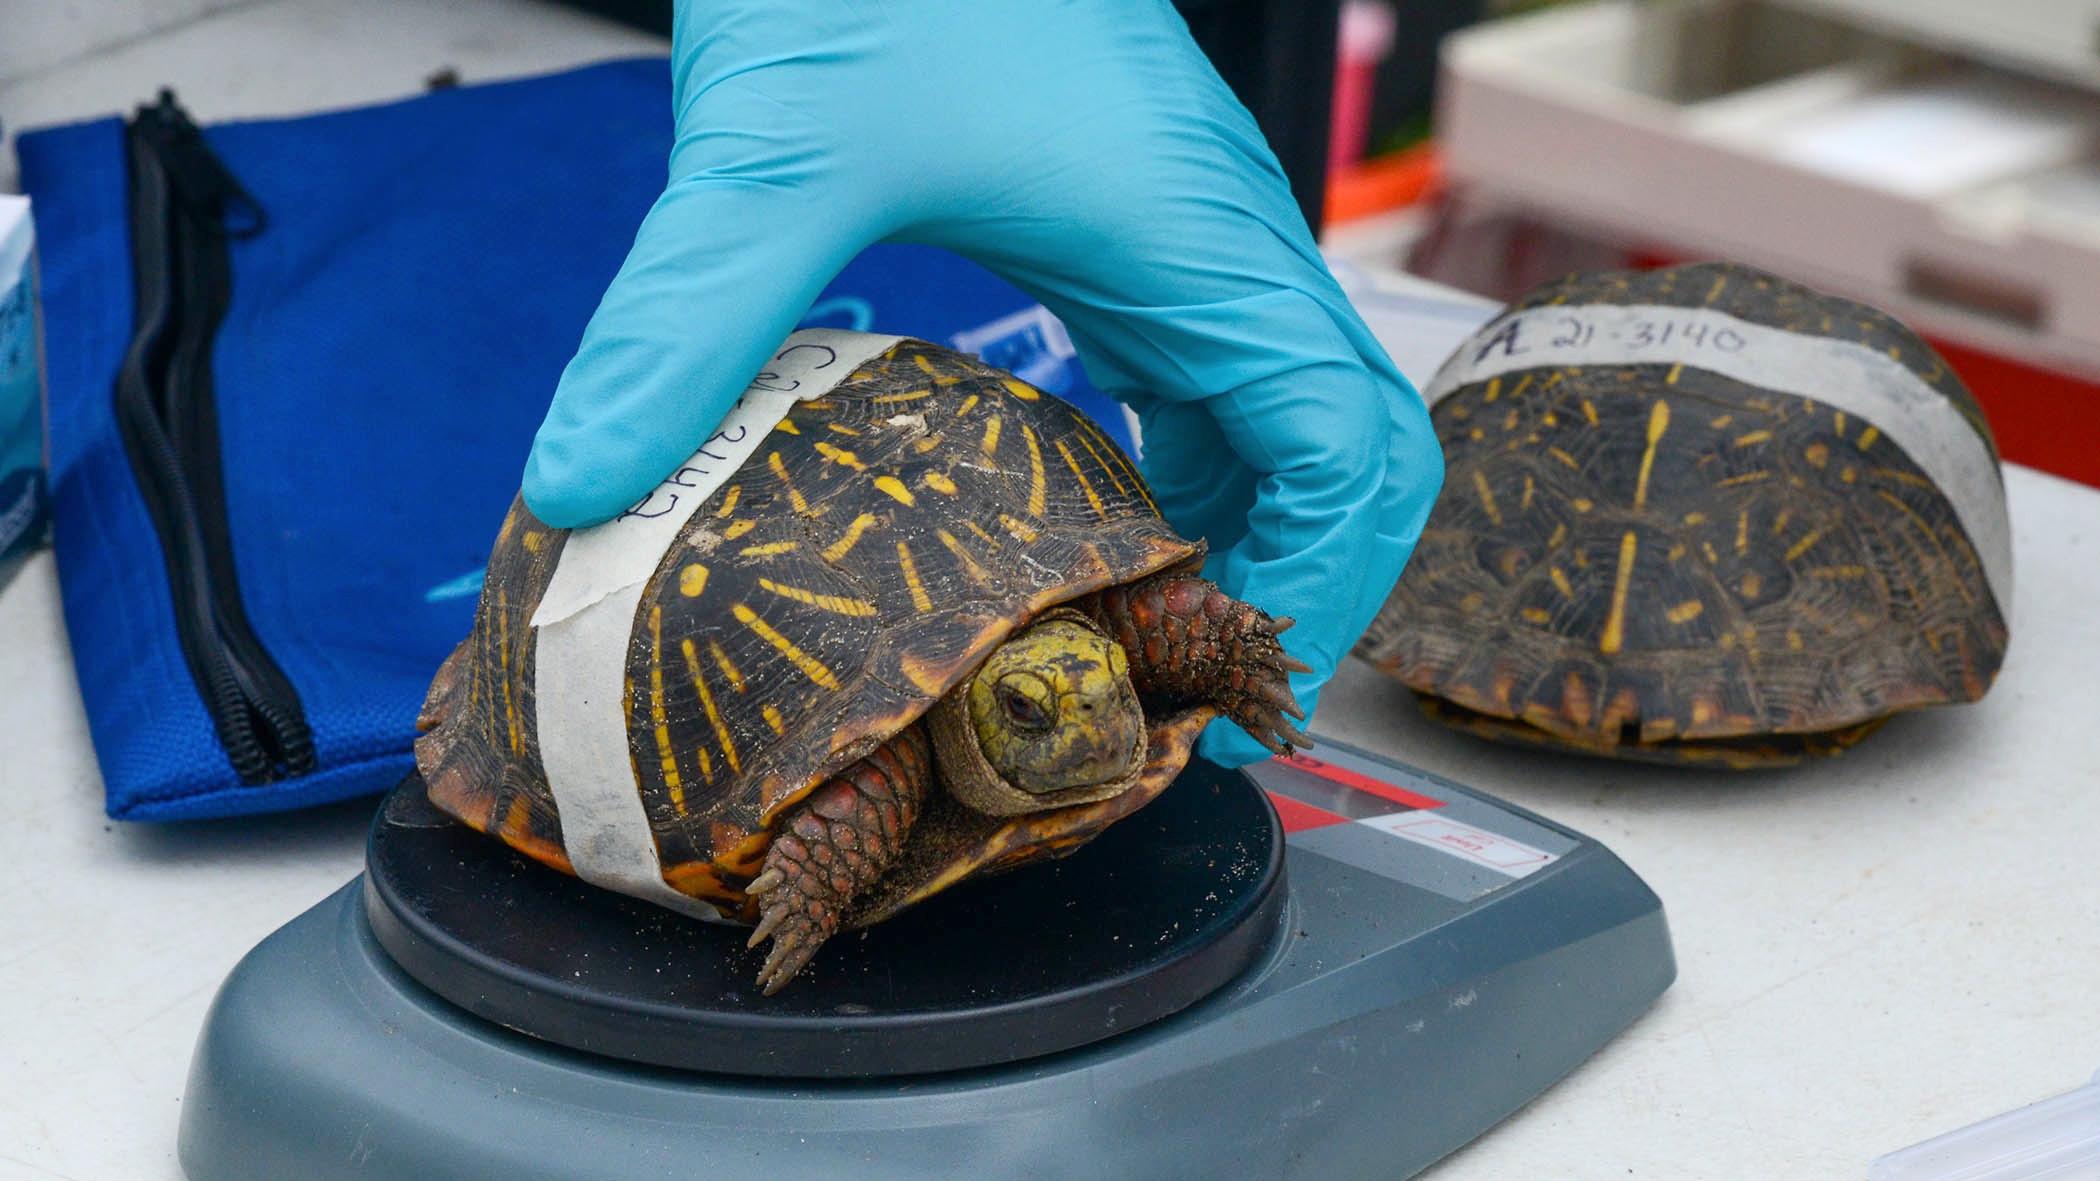 An ornate box turtle being weighed during a health examination. (Cathy Bazzoni / Chicago Zoological Society-Brookfield Zoo)